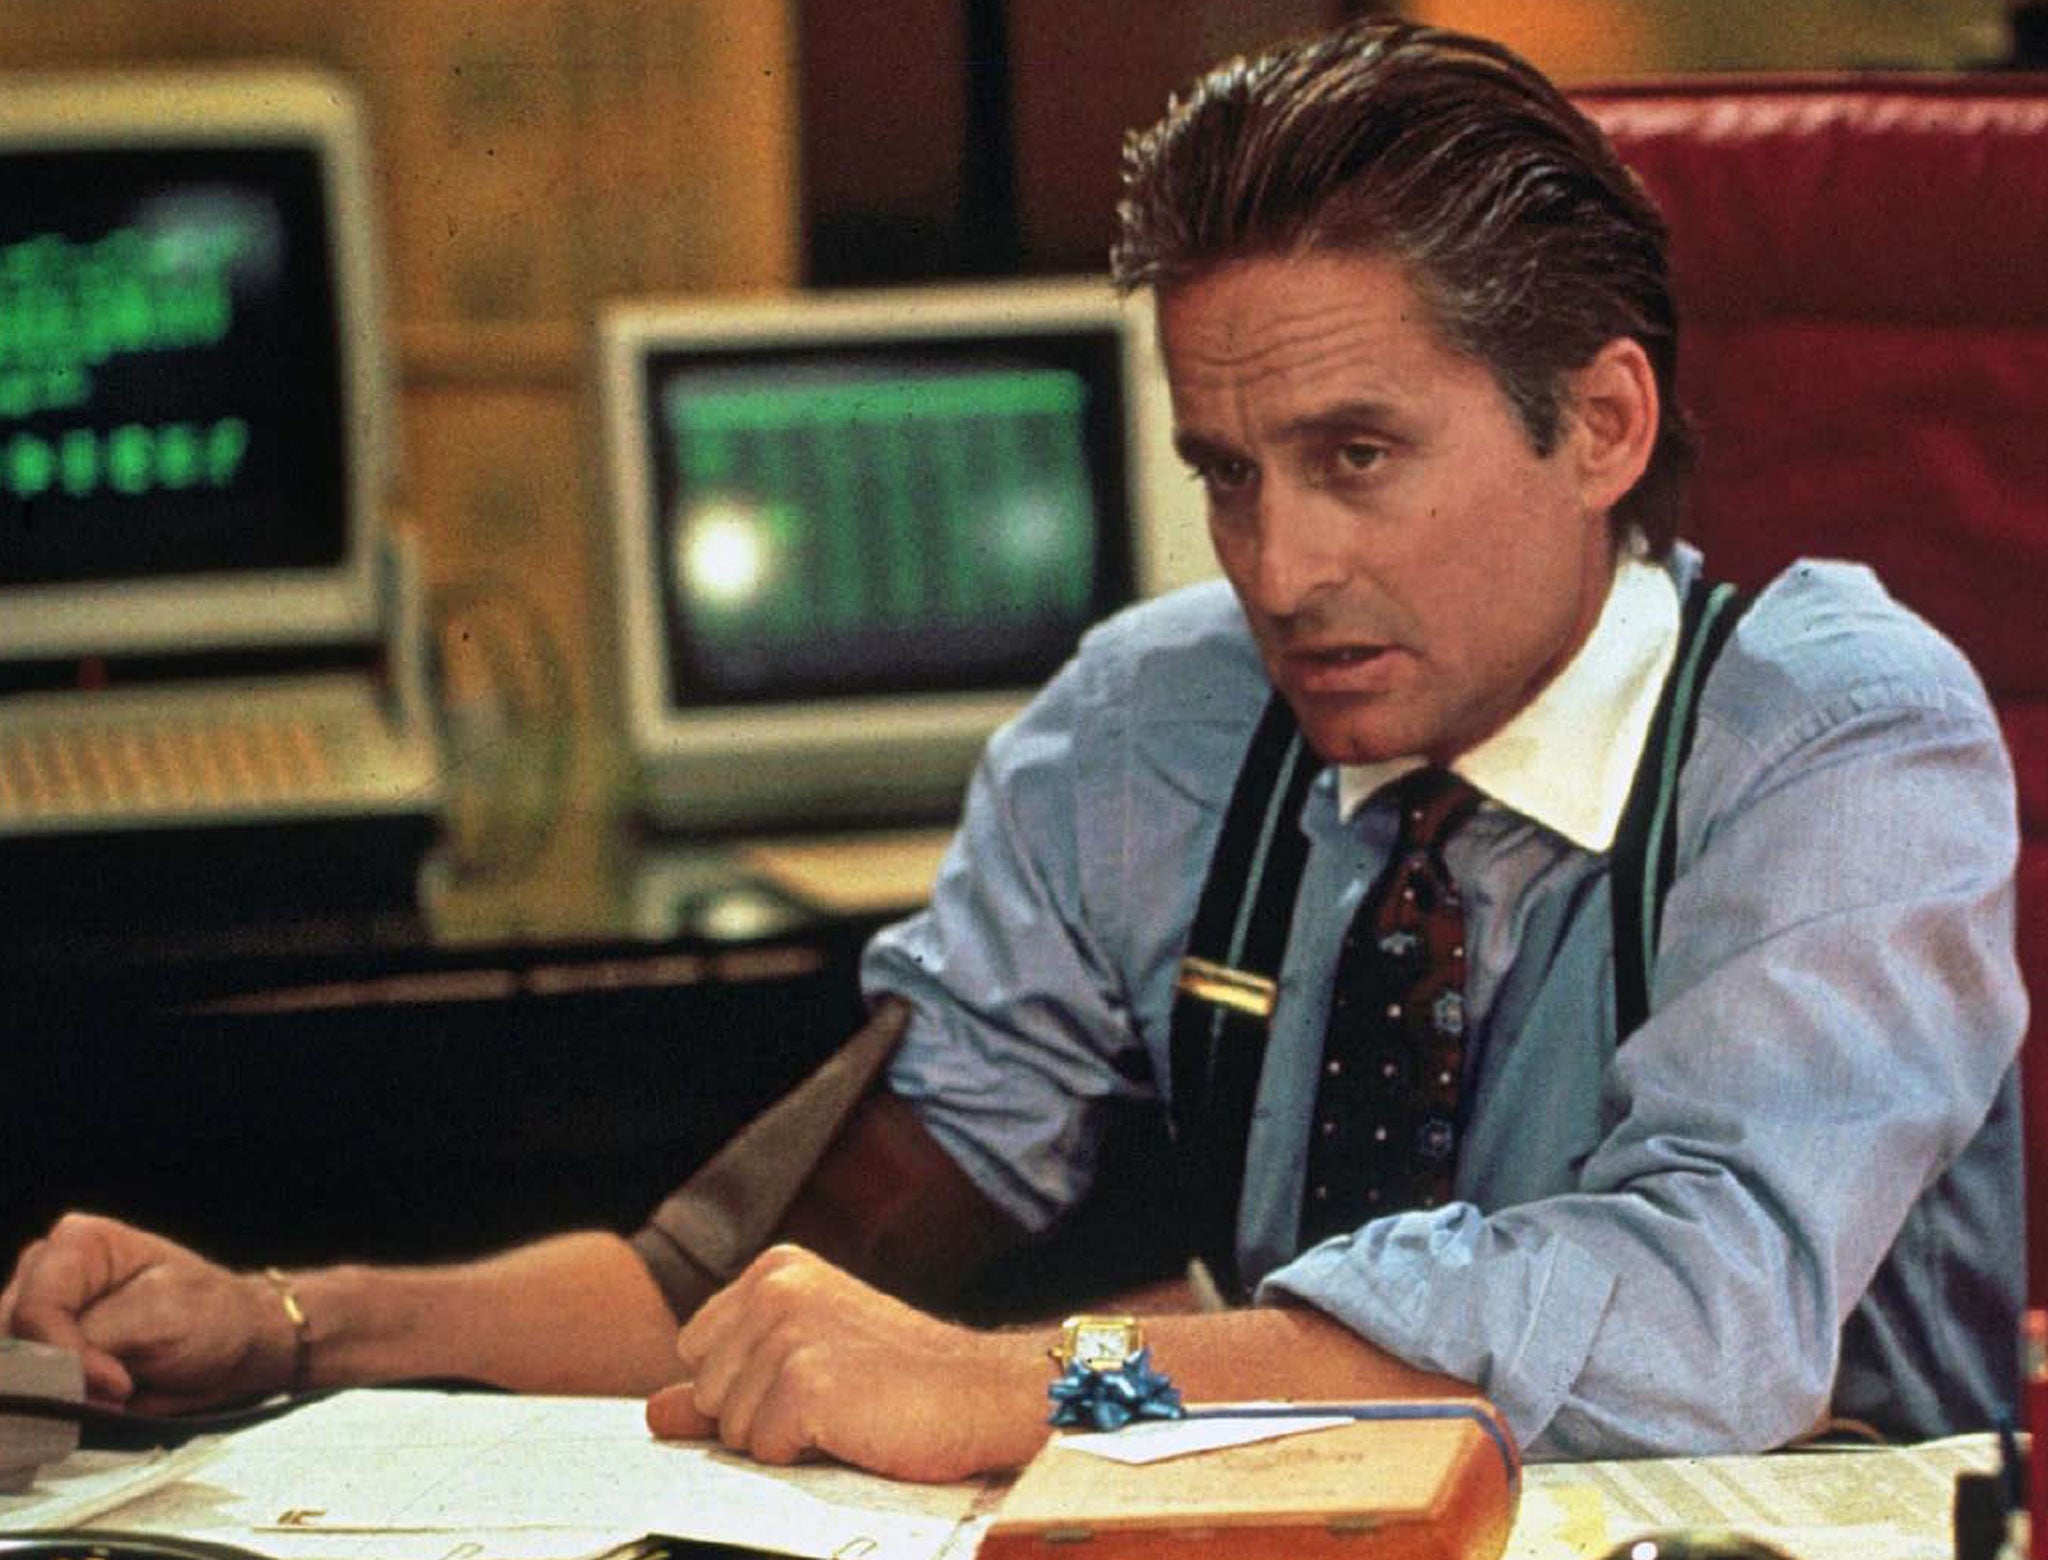 "The point is, ladies and gentleman, that greed, for lack of a better word, is good. Greed is right, greed works. Greed, in all of its forms; greed for life, for money, for love, knowledge has marked the upward surge of mankind." - Gordon Gekko, Wall Street.